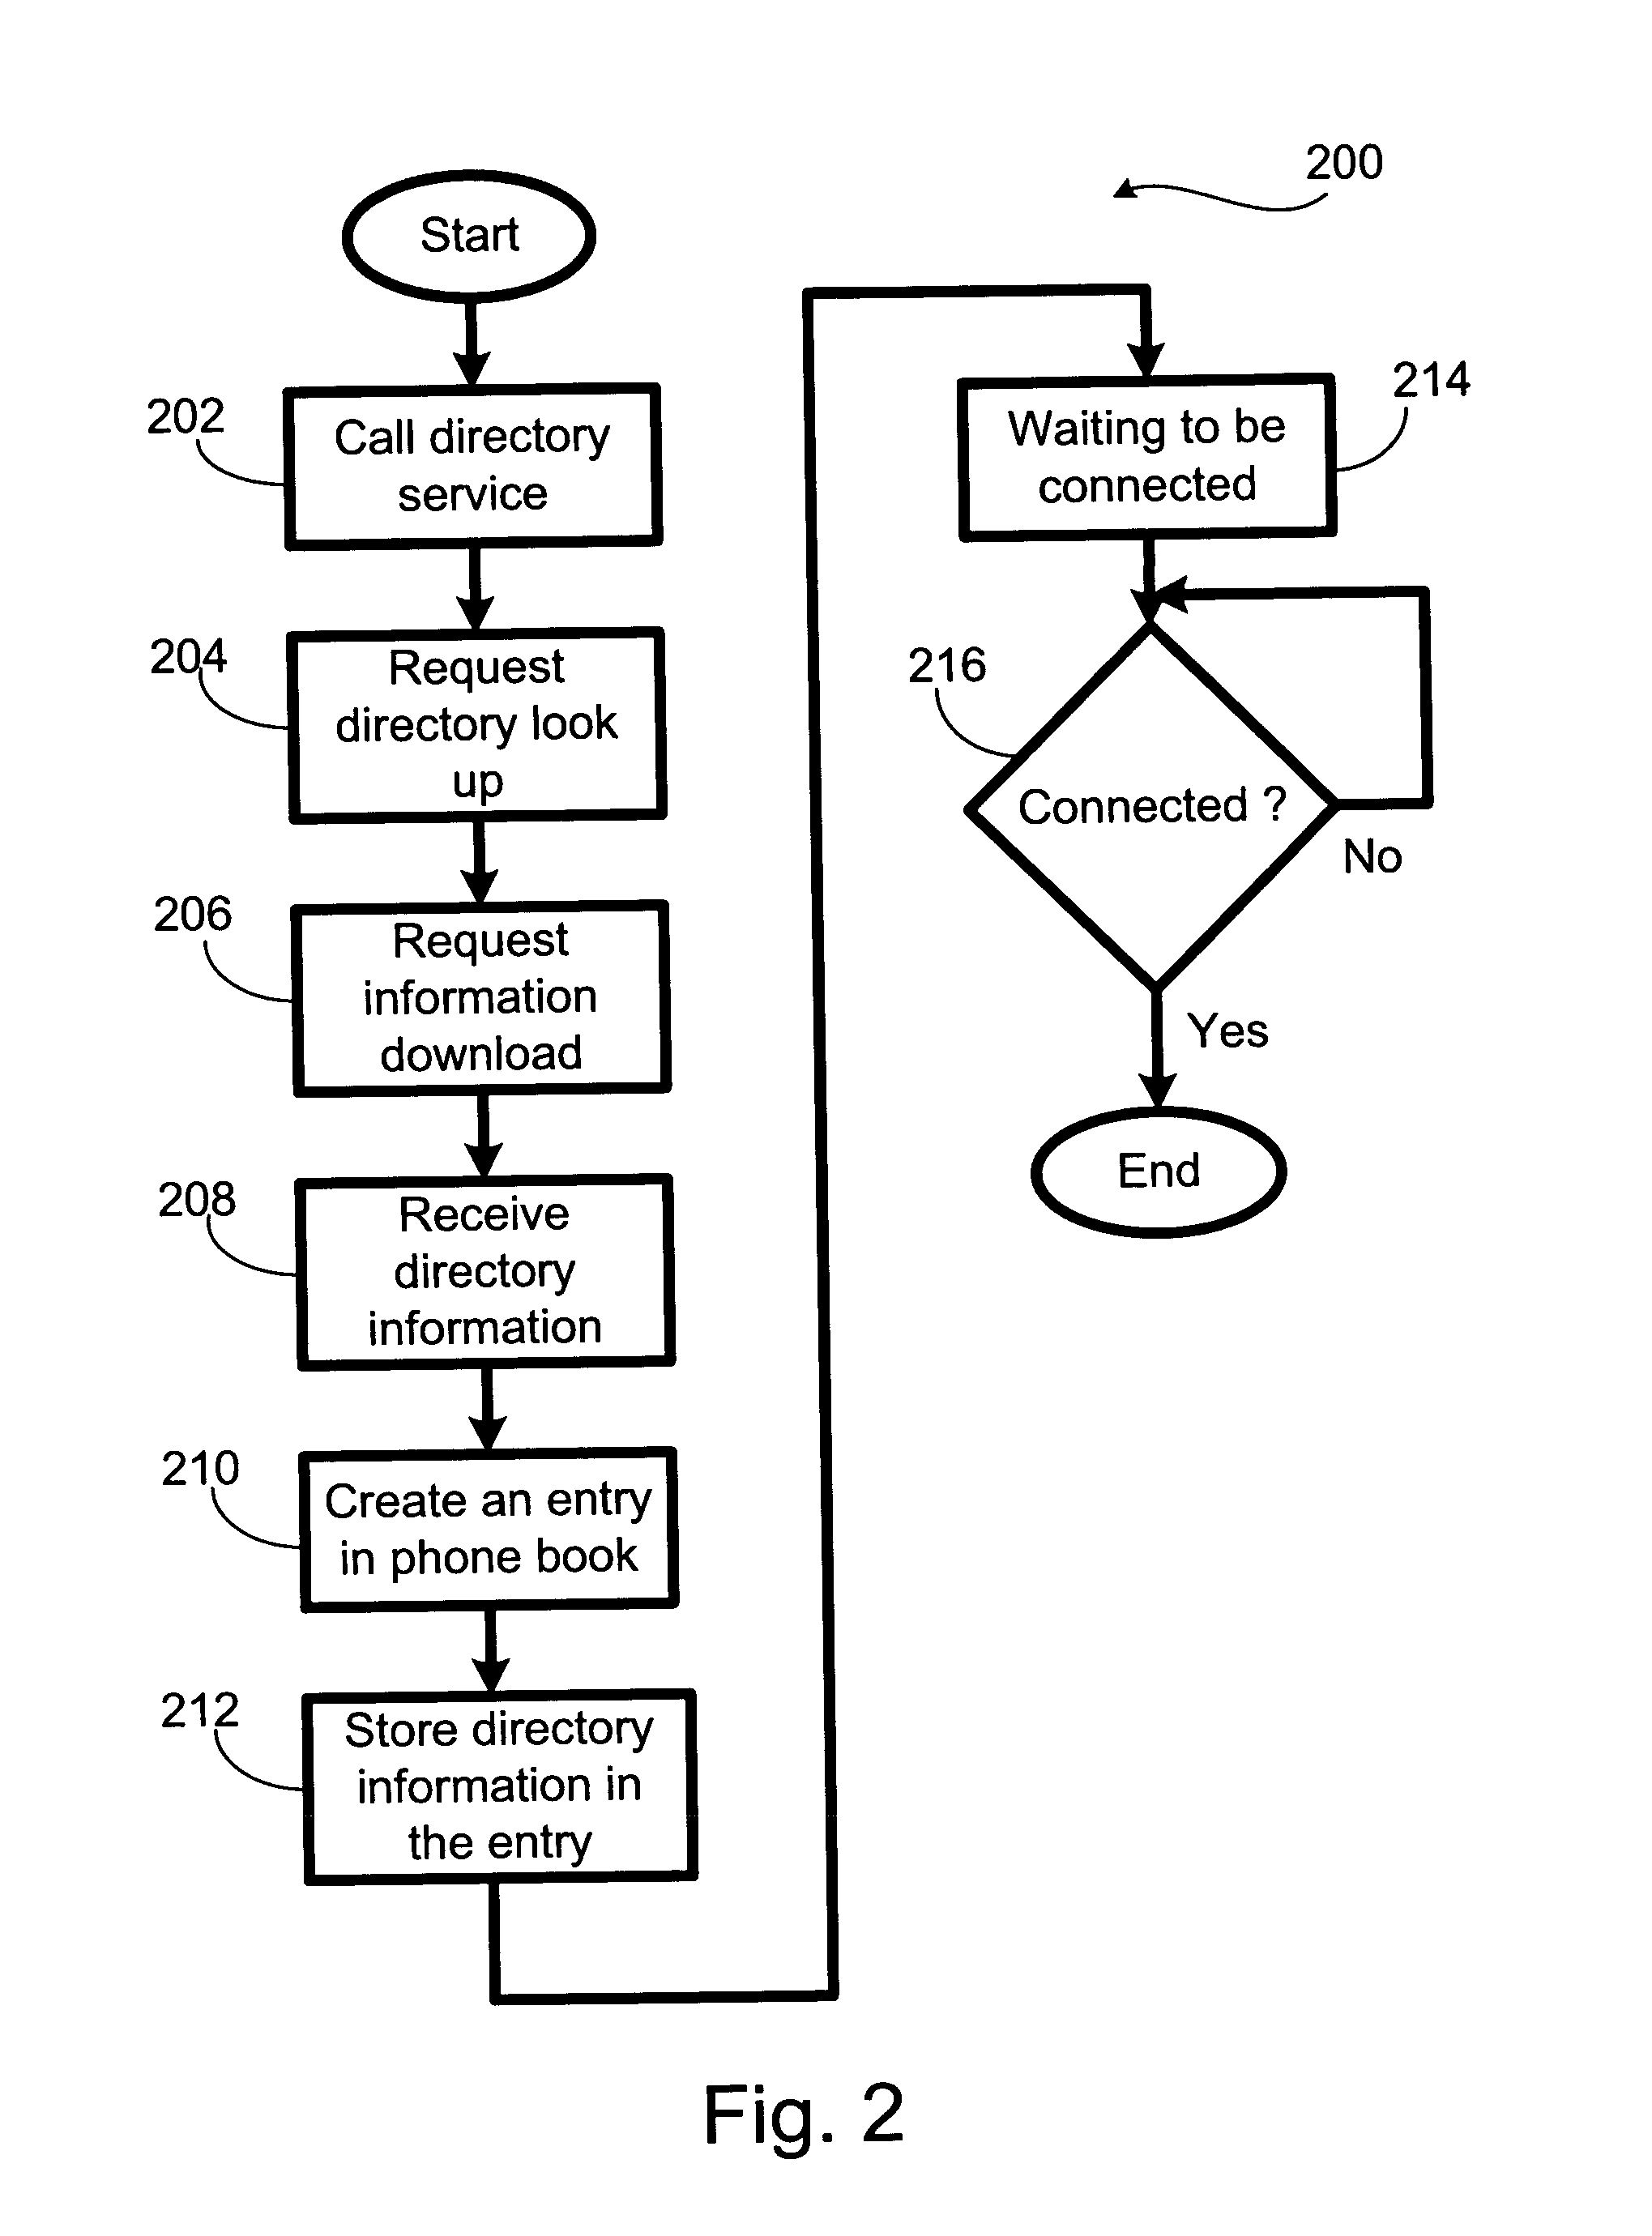 Automatic data entry into wireless device directory